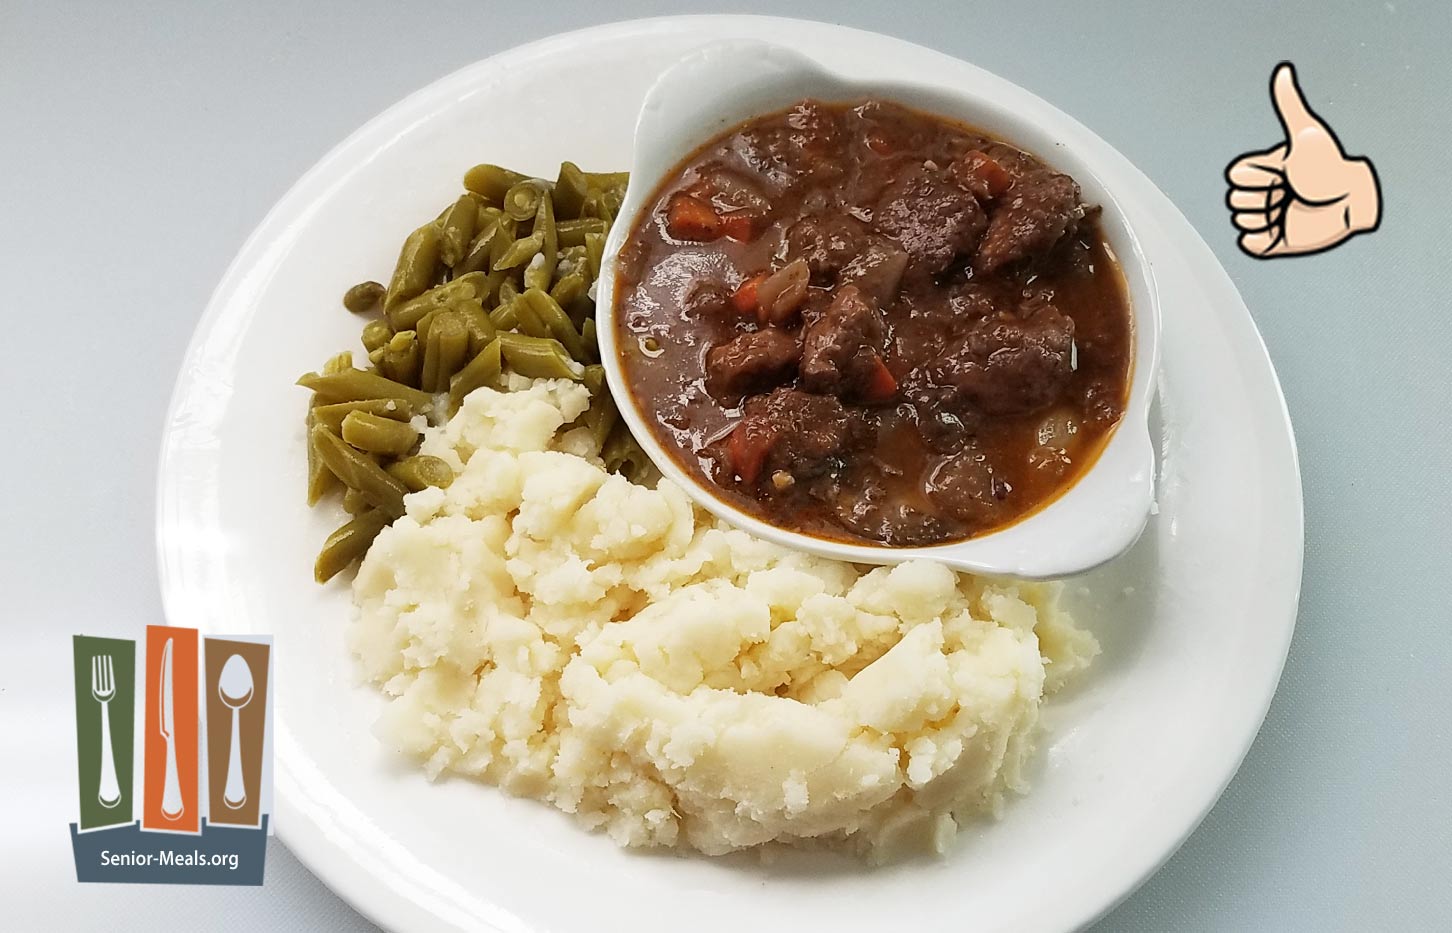 Beef Bourguignon with Simple Potato Purée and String Beans - $12